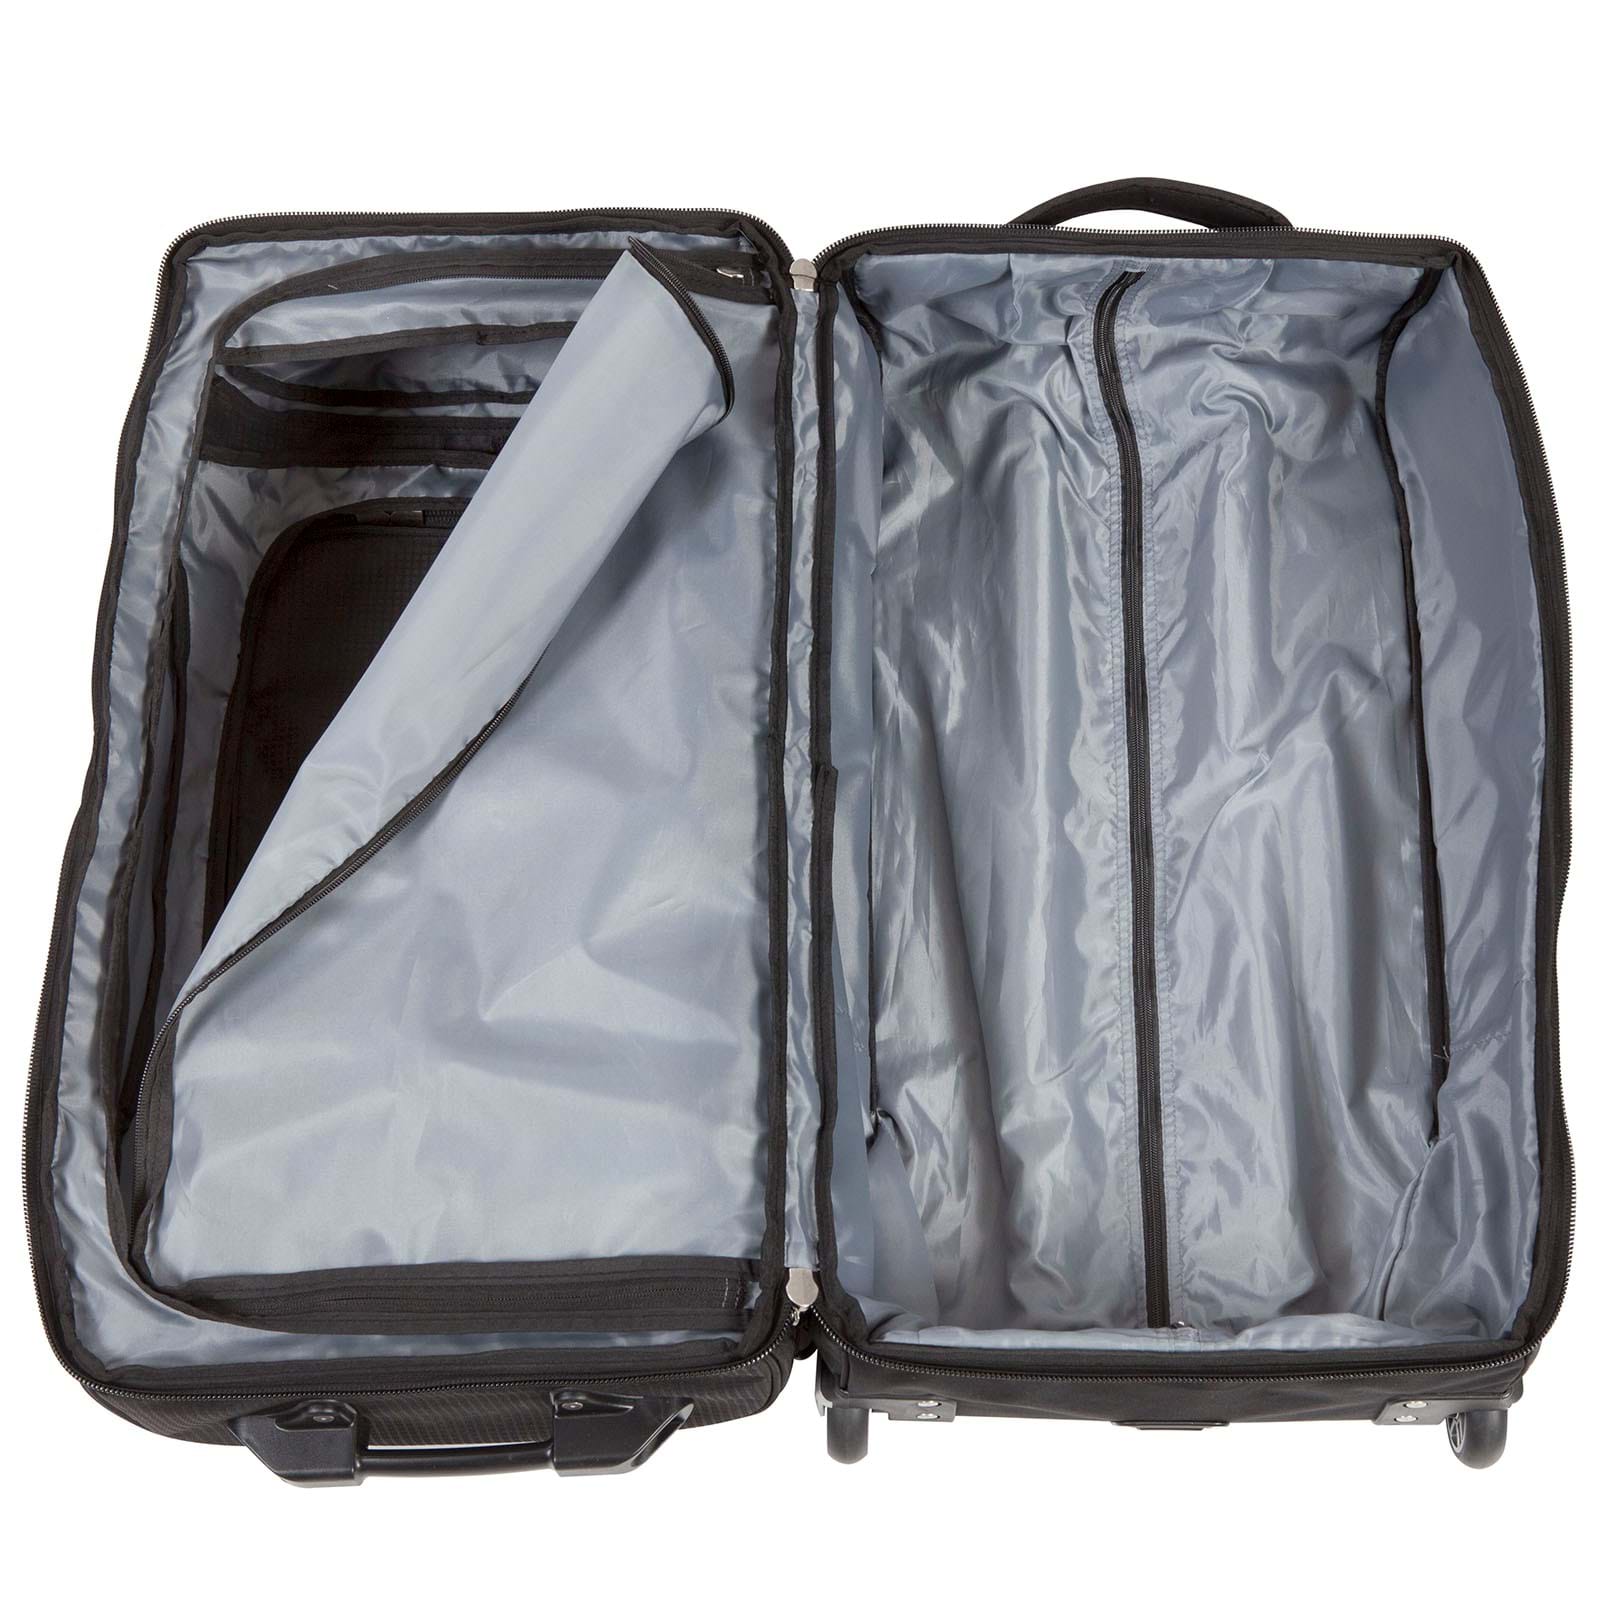 EPE Madrid 80ltr Roller Bag with Wheels - 50% OFF - limited time ...